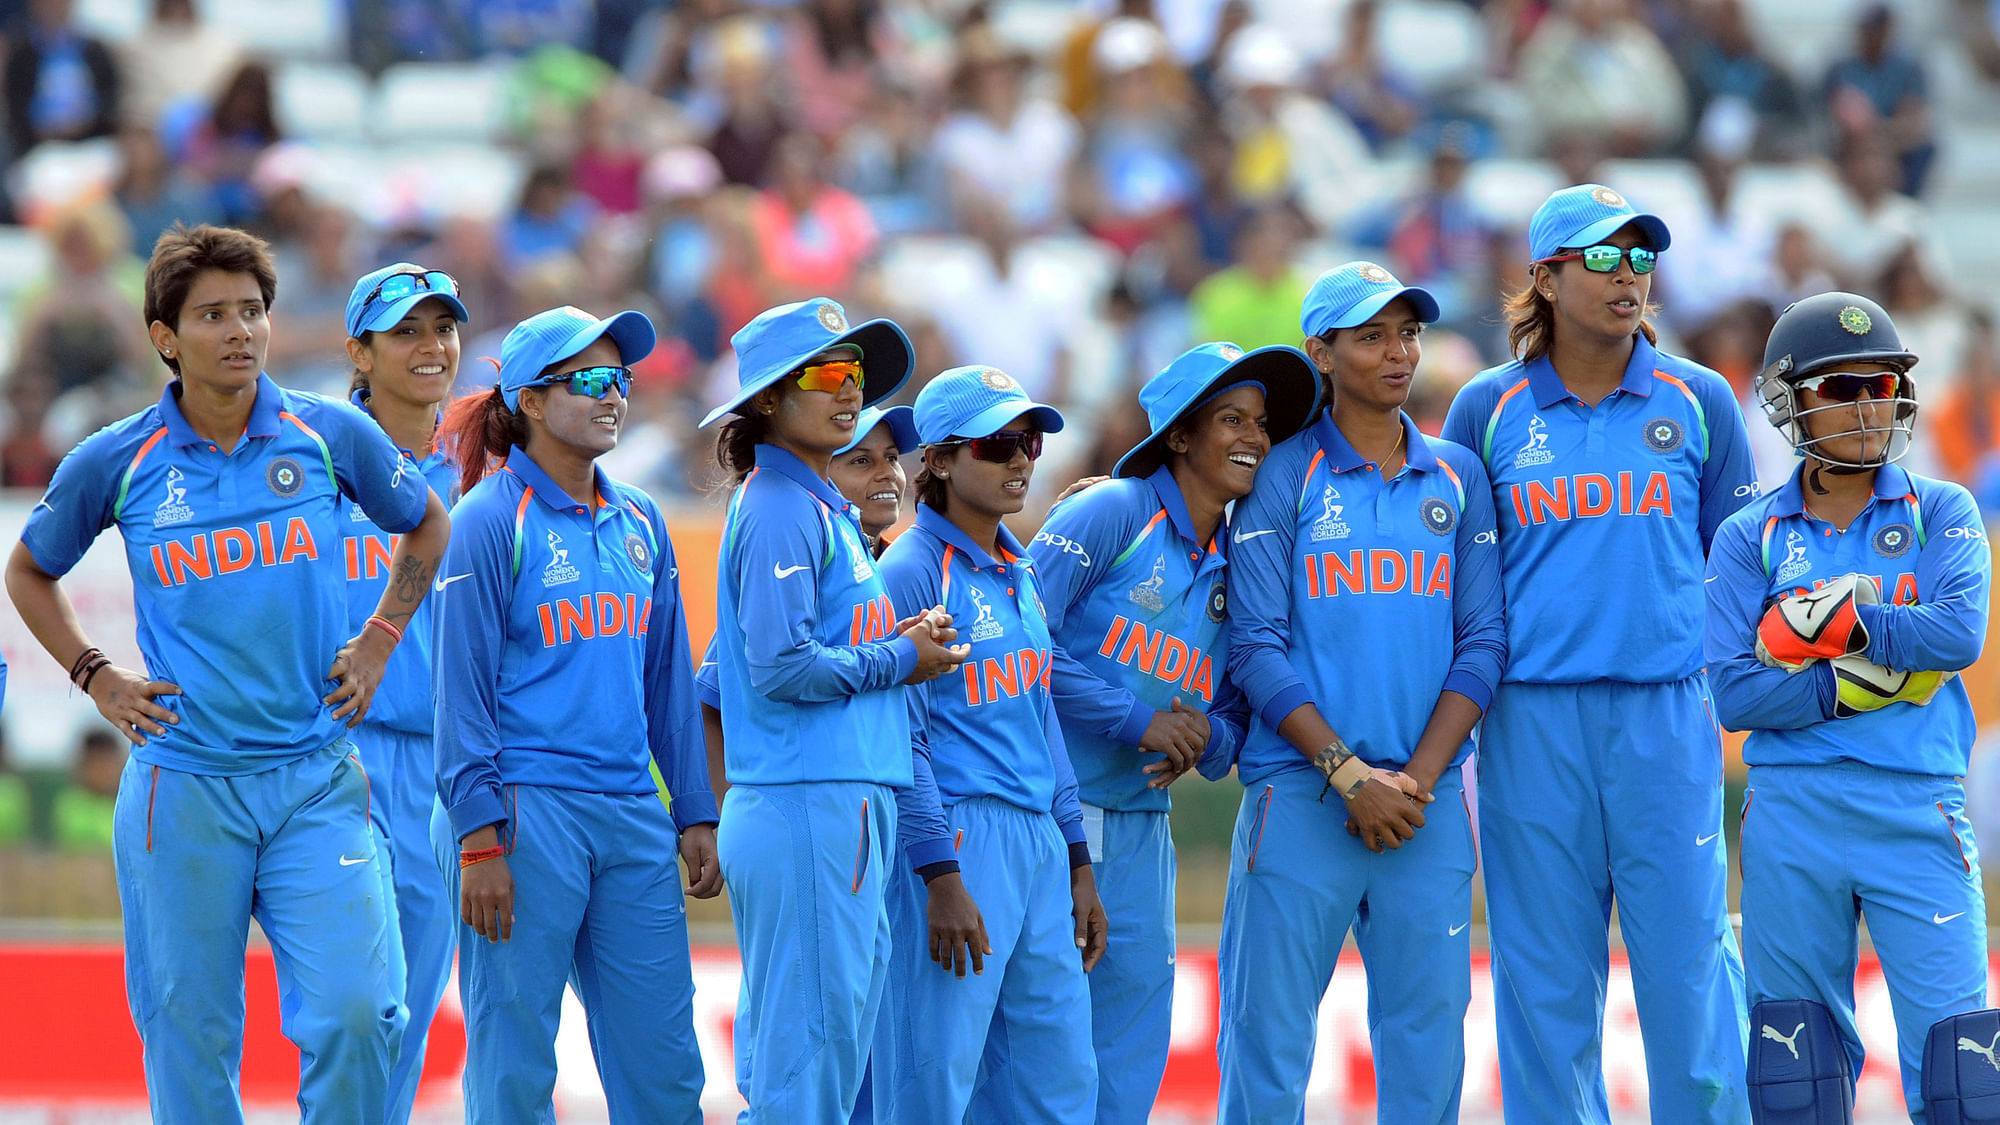 India women’s cricket team are currently ranked number 2 in the ICC Women’s ODI Rankings